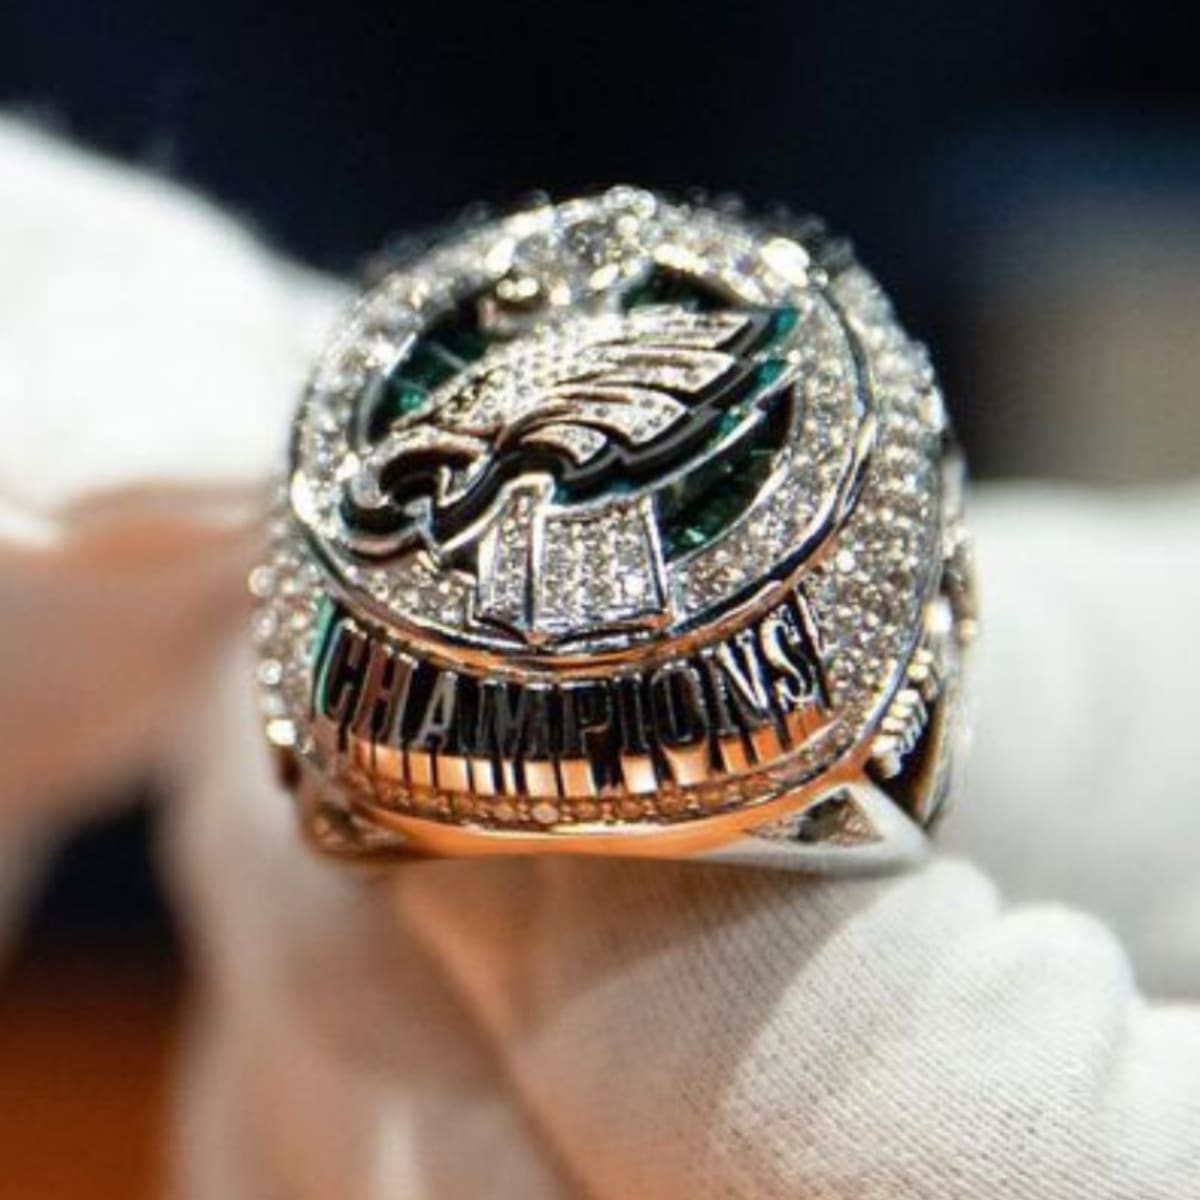 Eagles Super Bowl rings: Honors dog masks and 'Philly Special